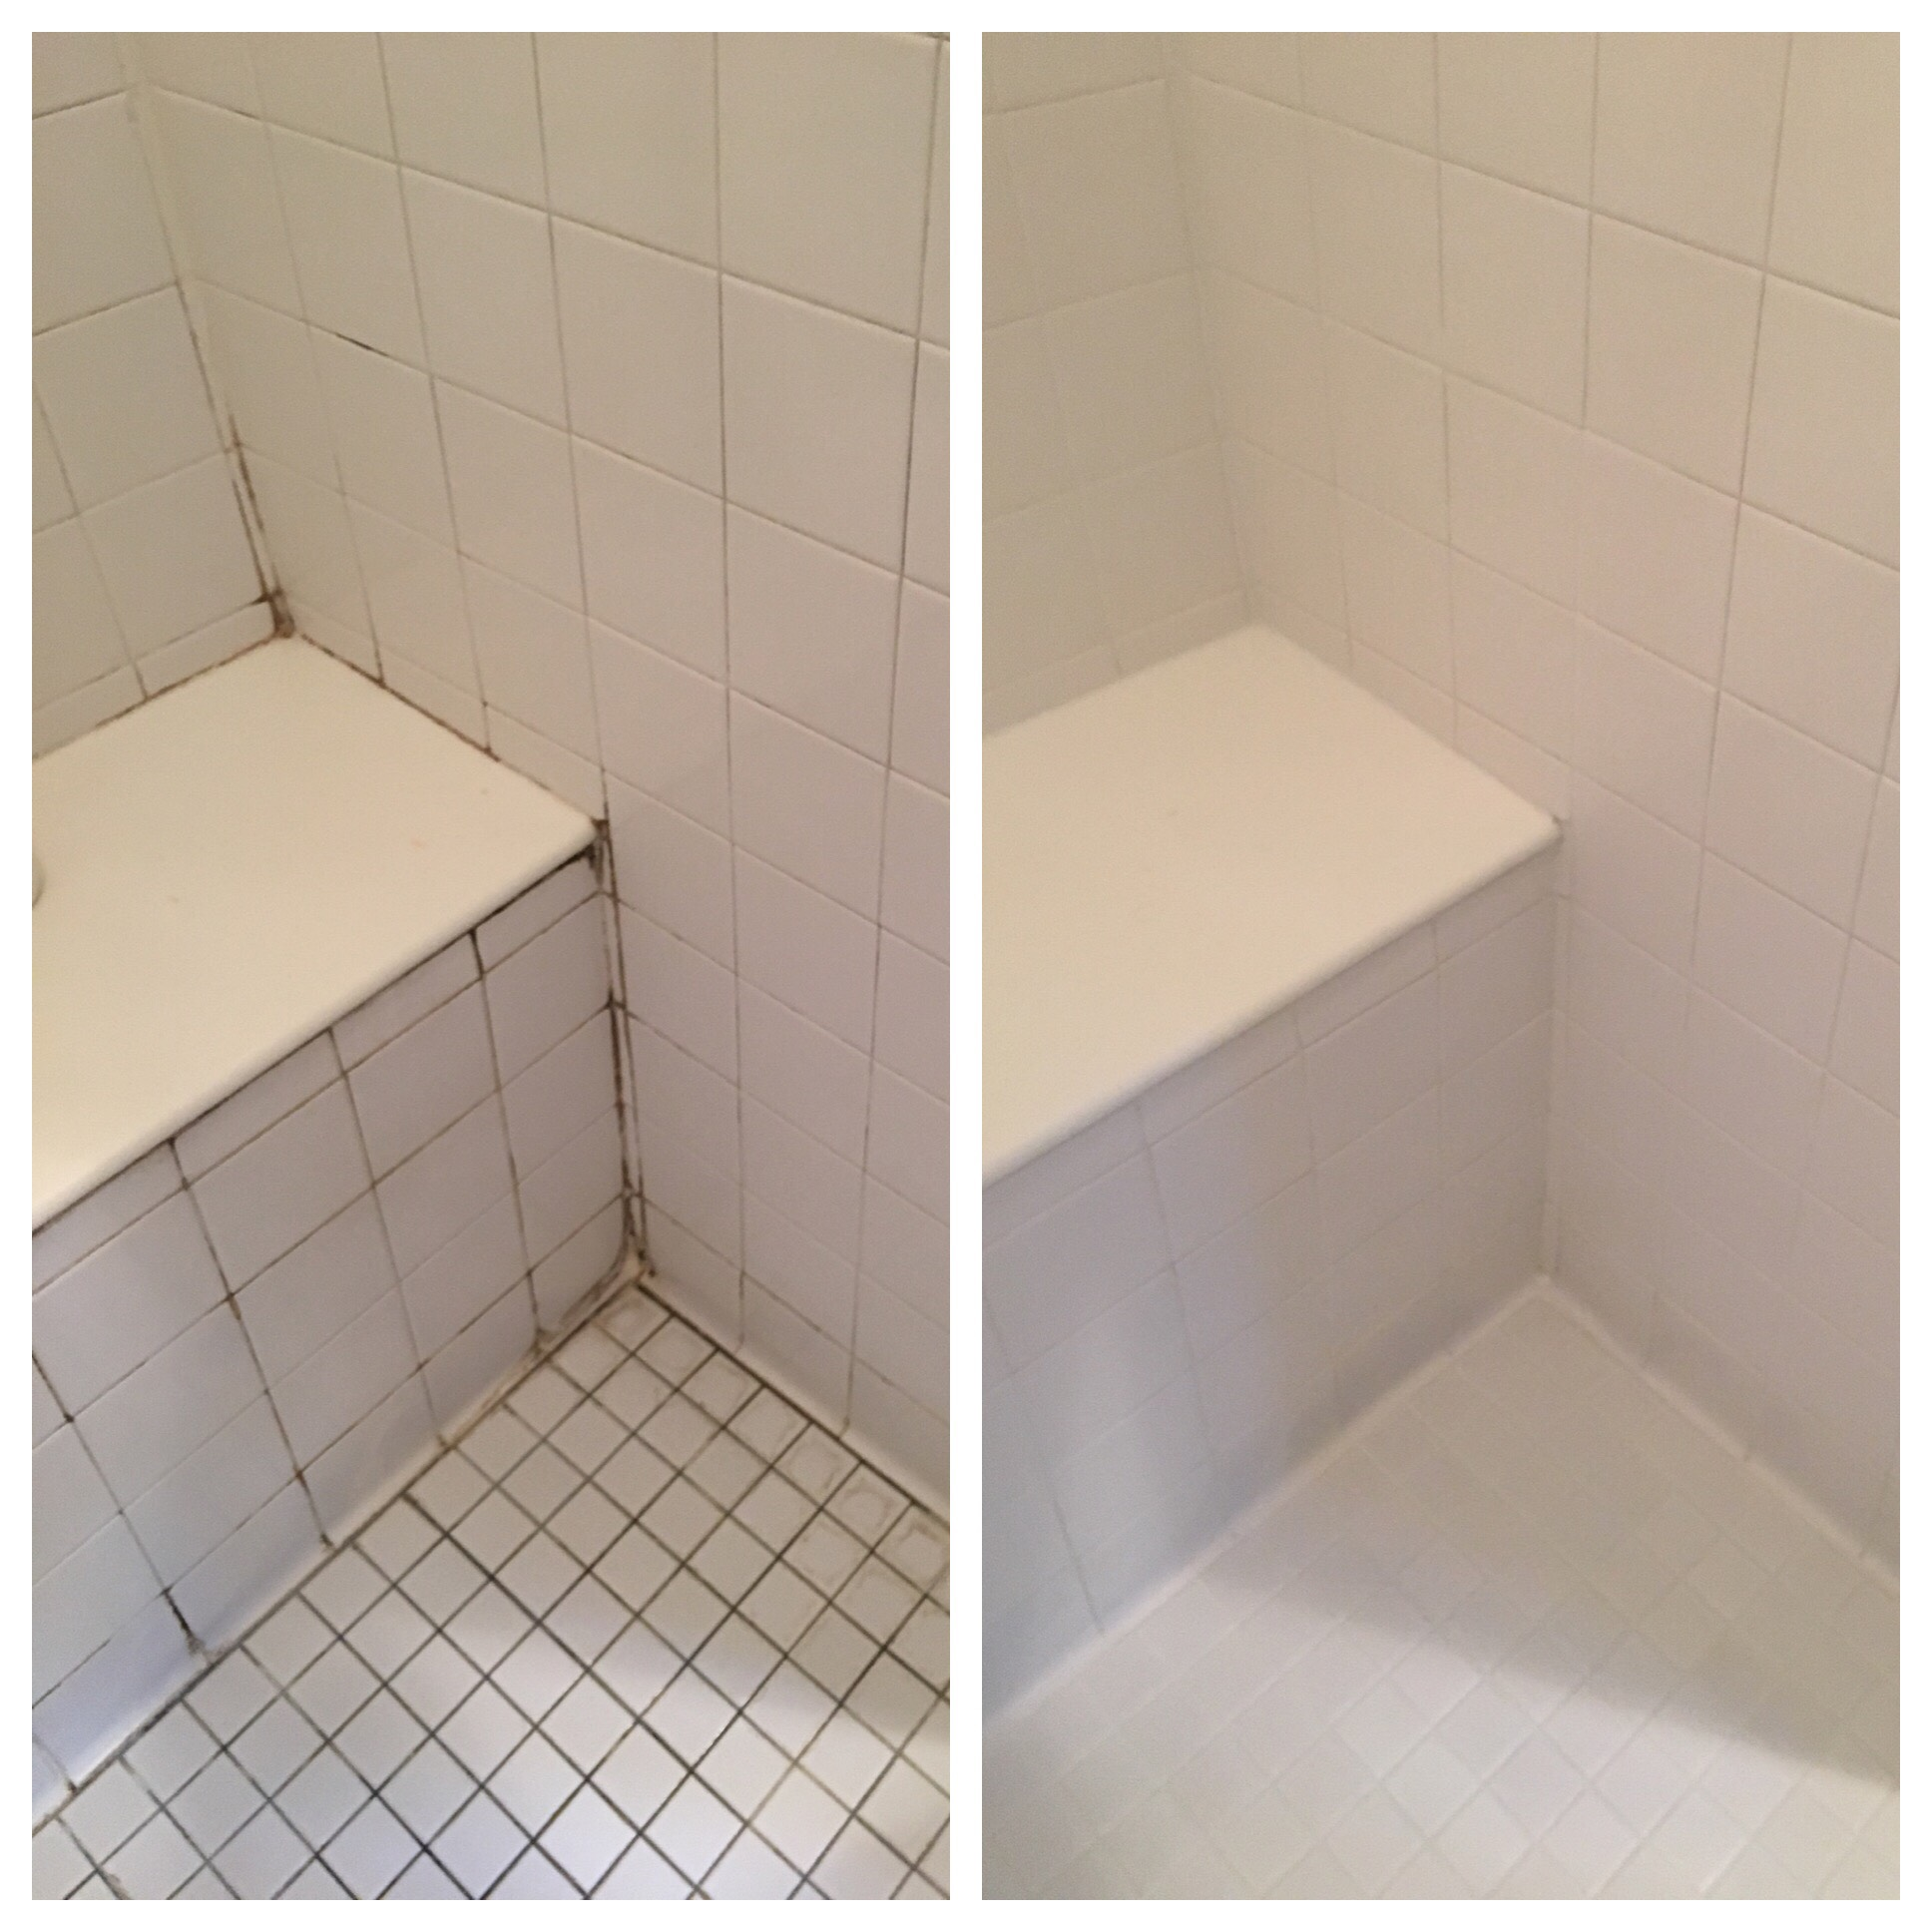 Marblelife Tile And Grout Cleaning, How To Clean Badly Stained Tile Grout